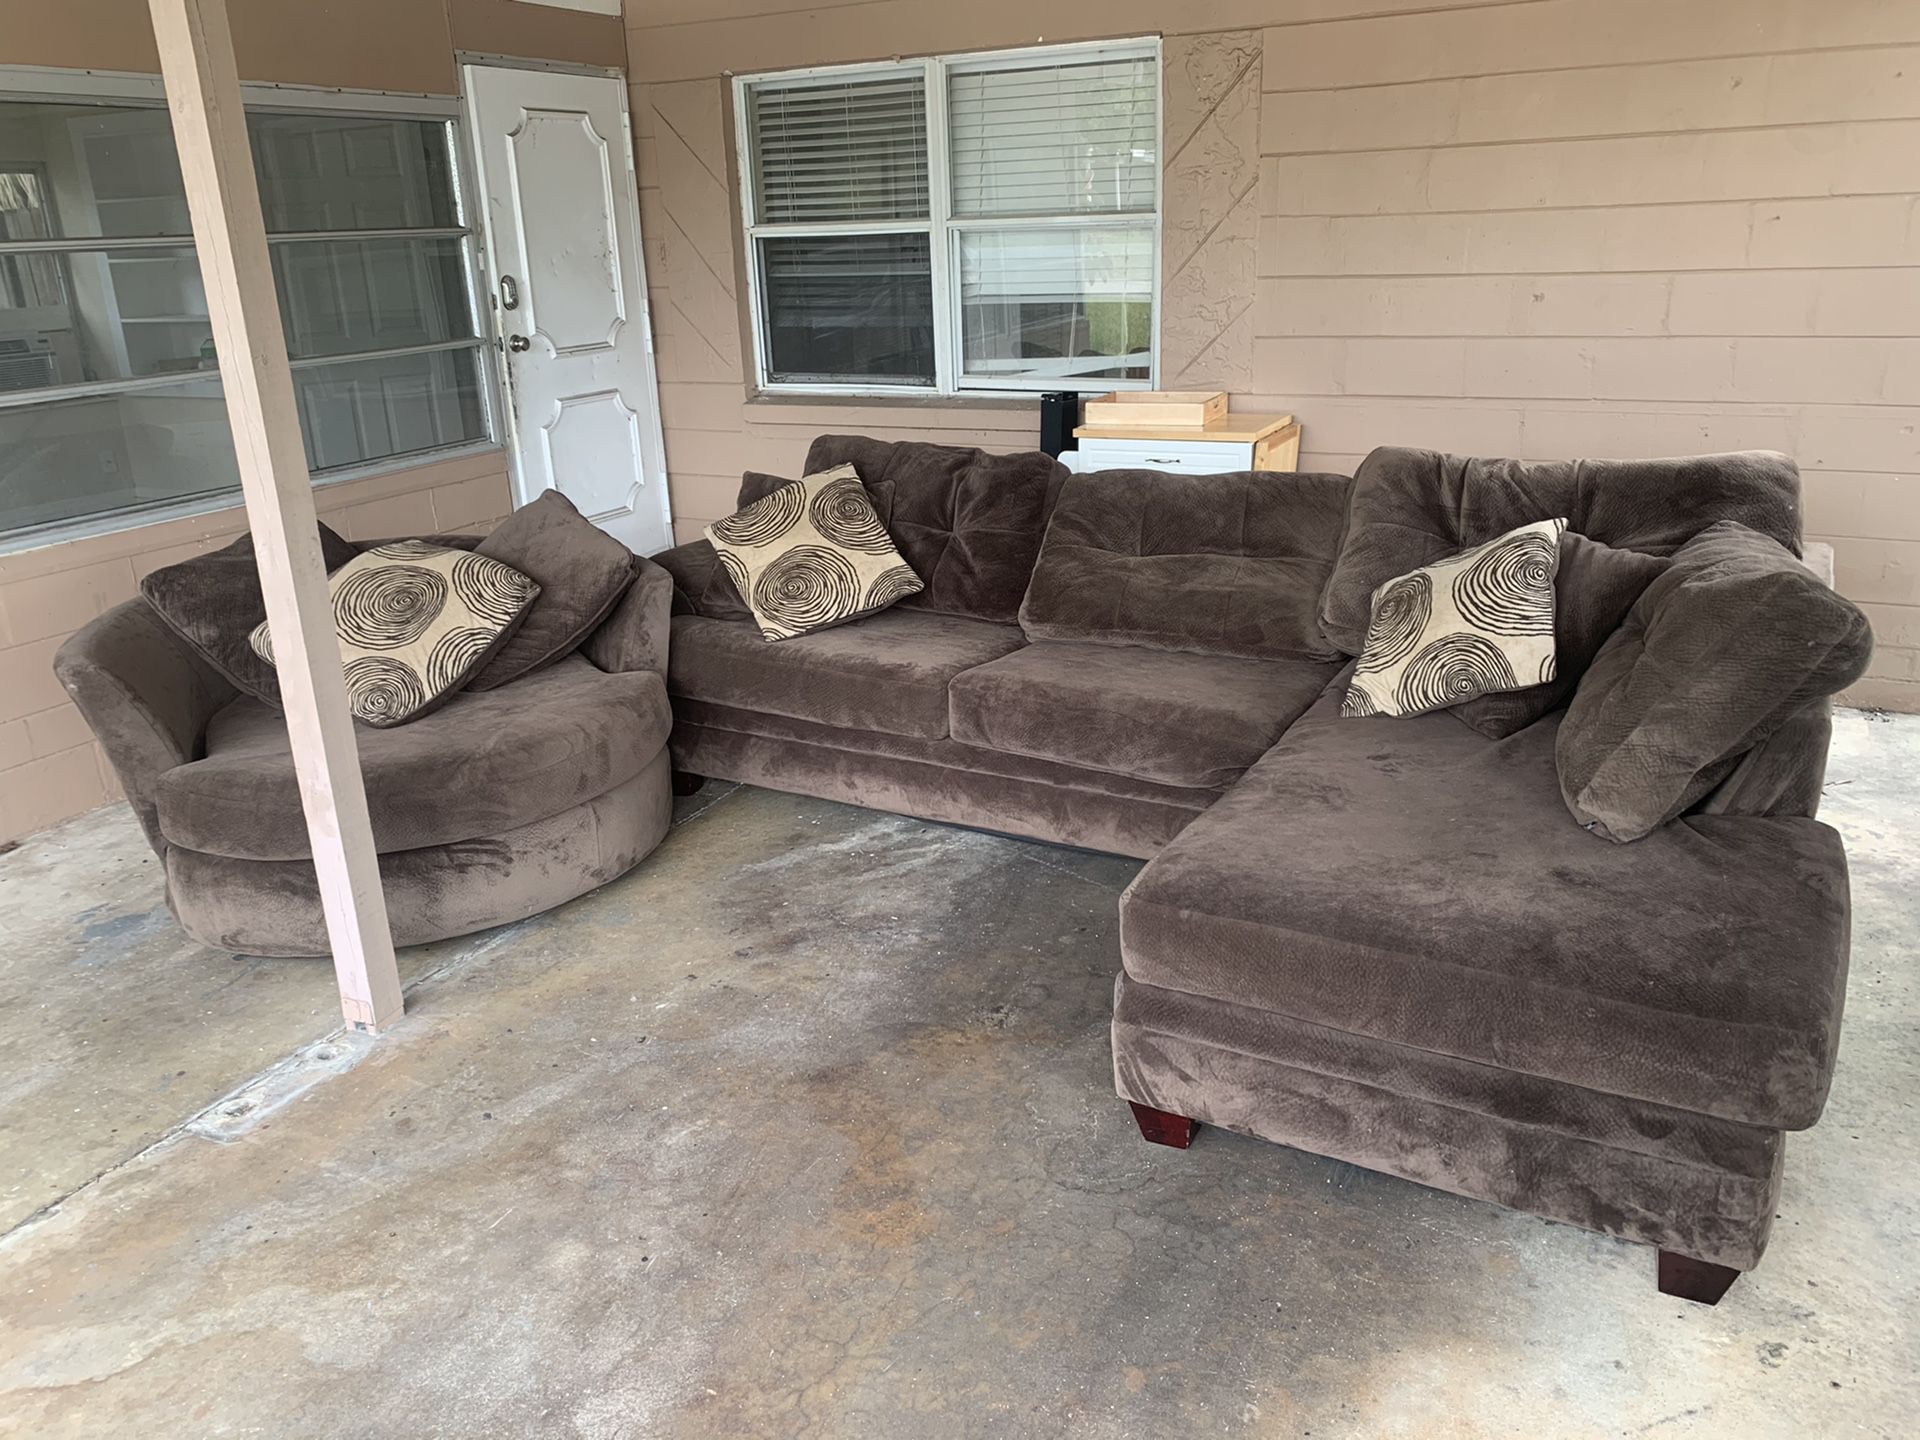 FREE COUCH, need gone